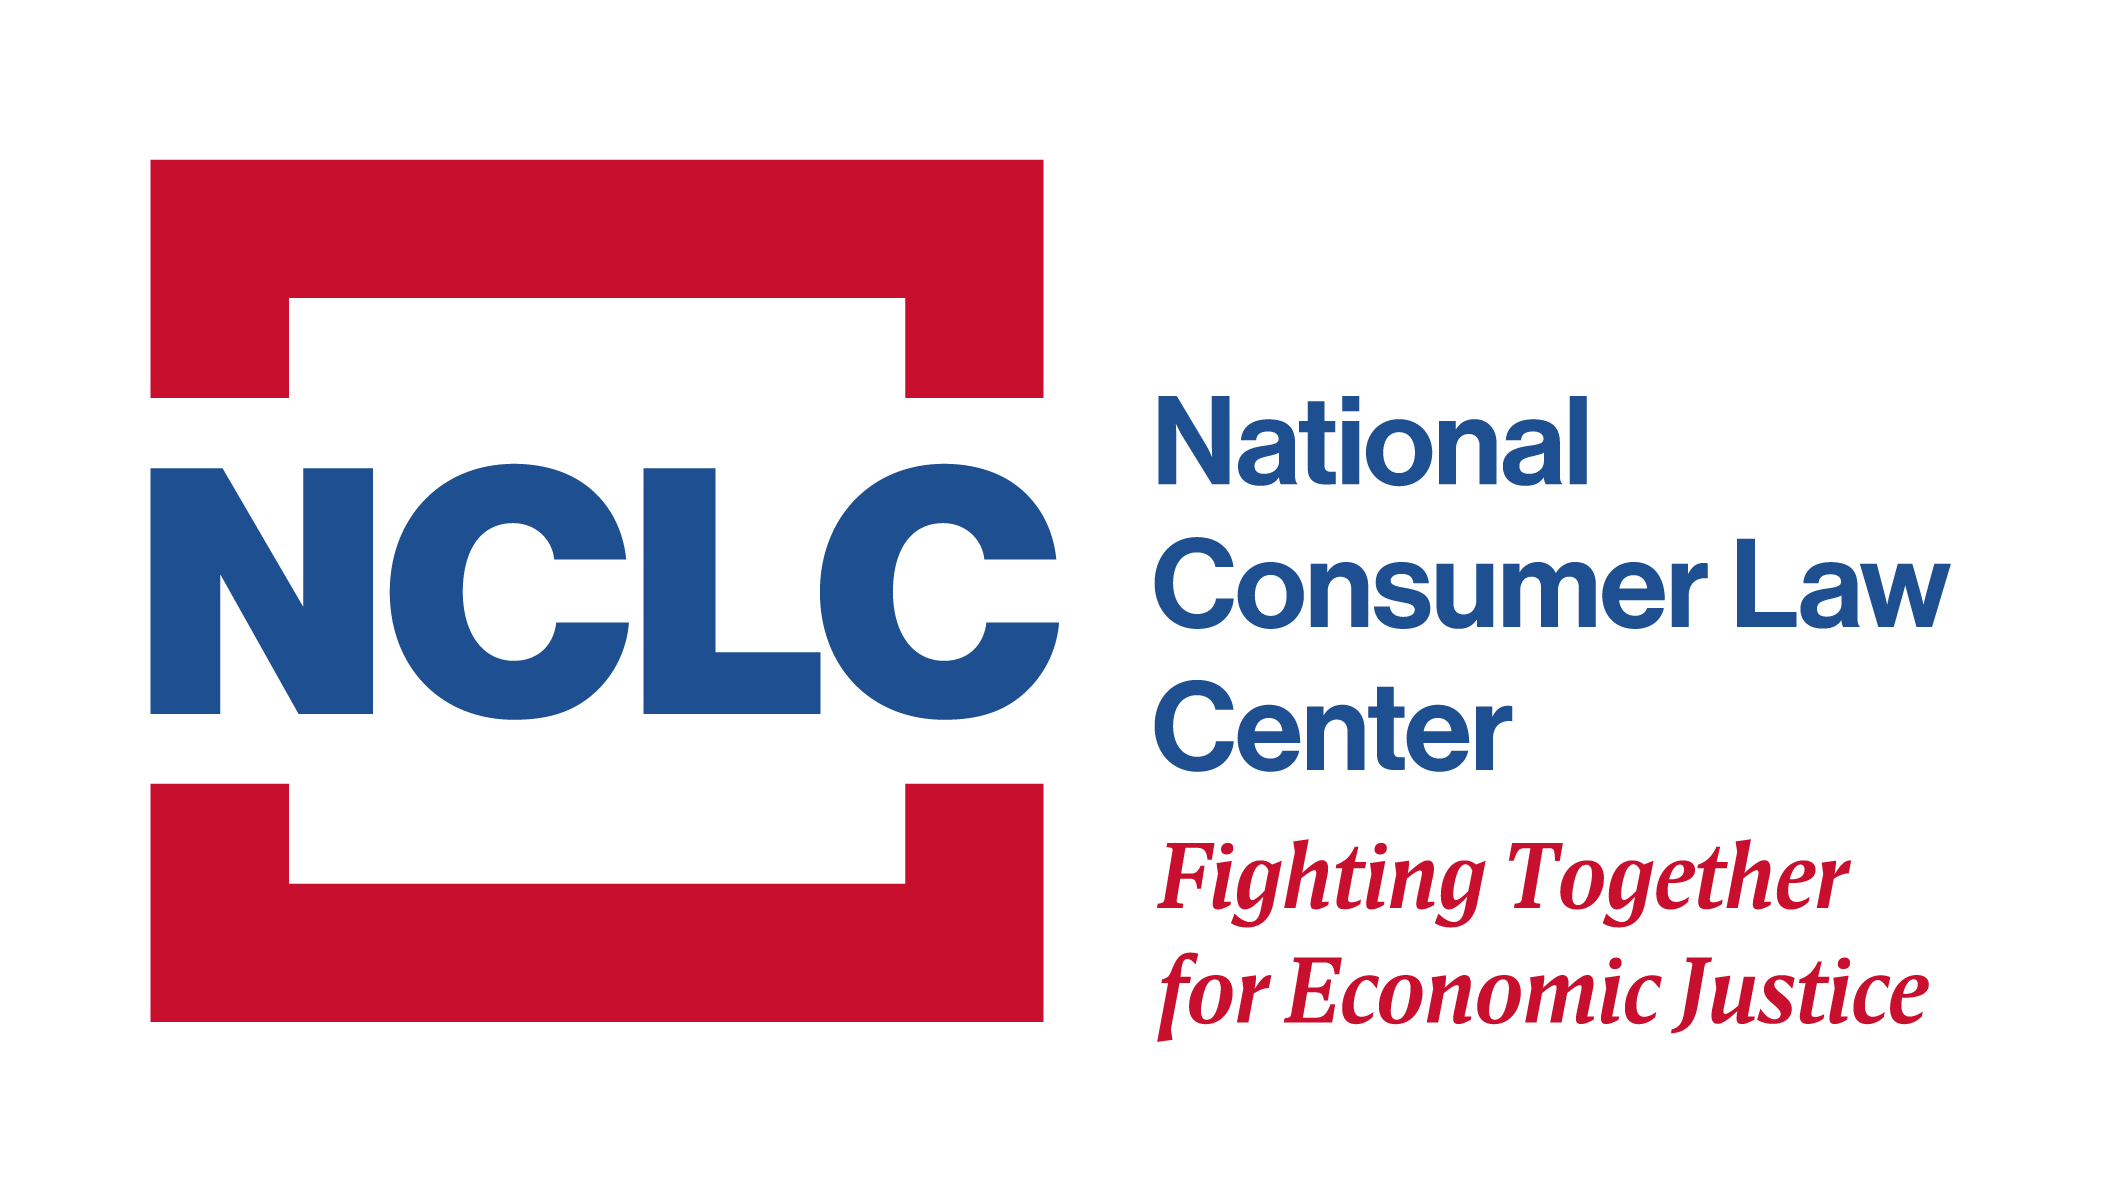 National Consumer Law Center (1)